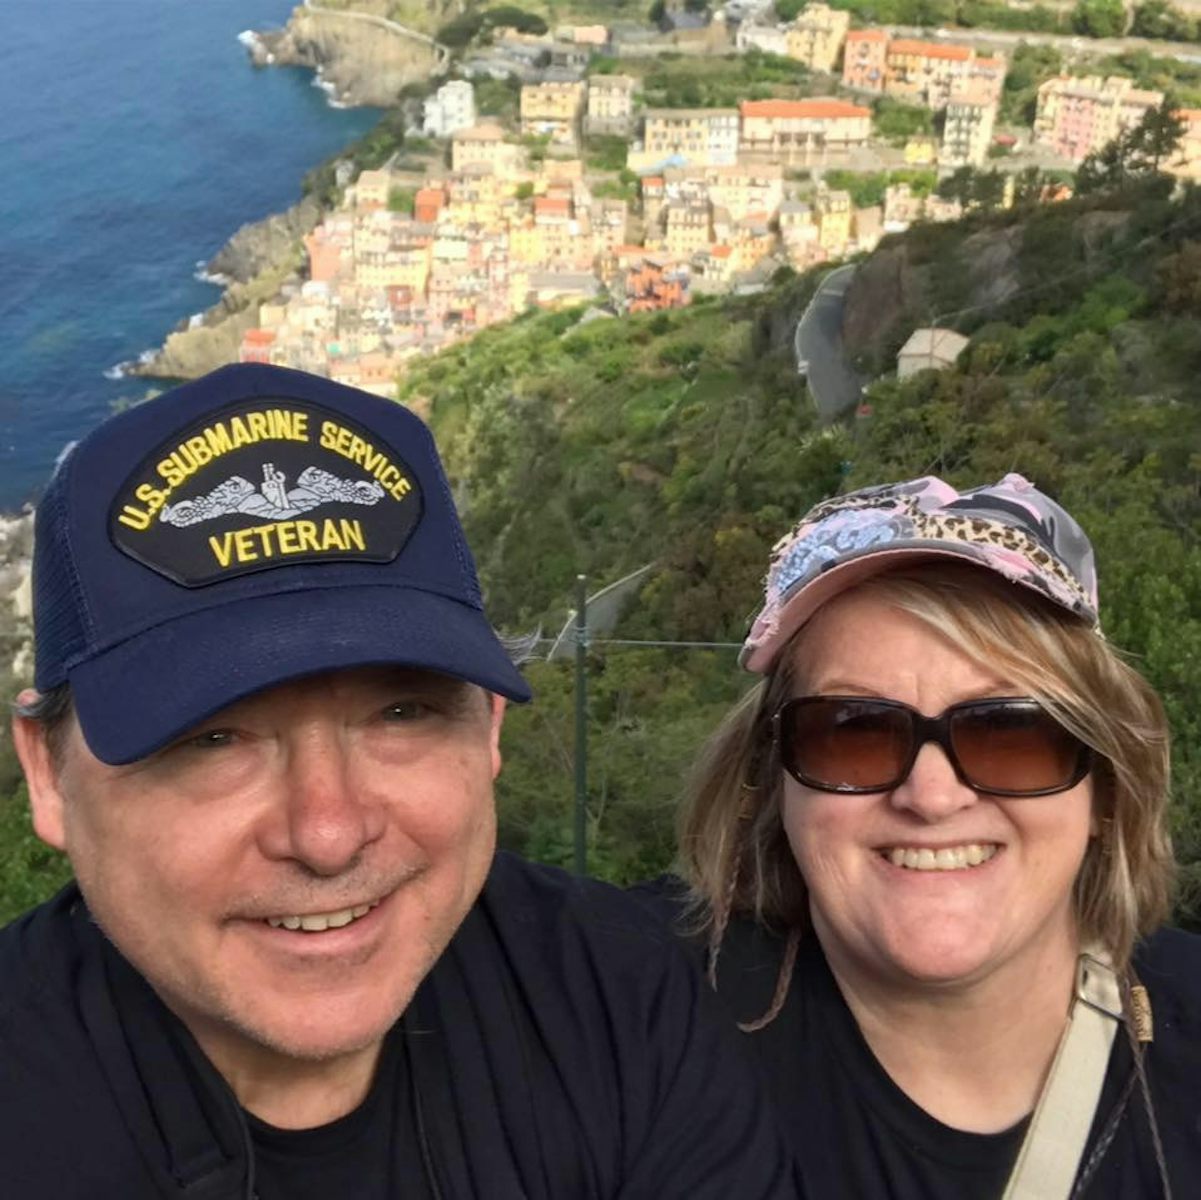 Me and Wife at a scenic view in Italy.